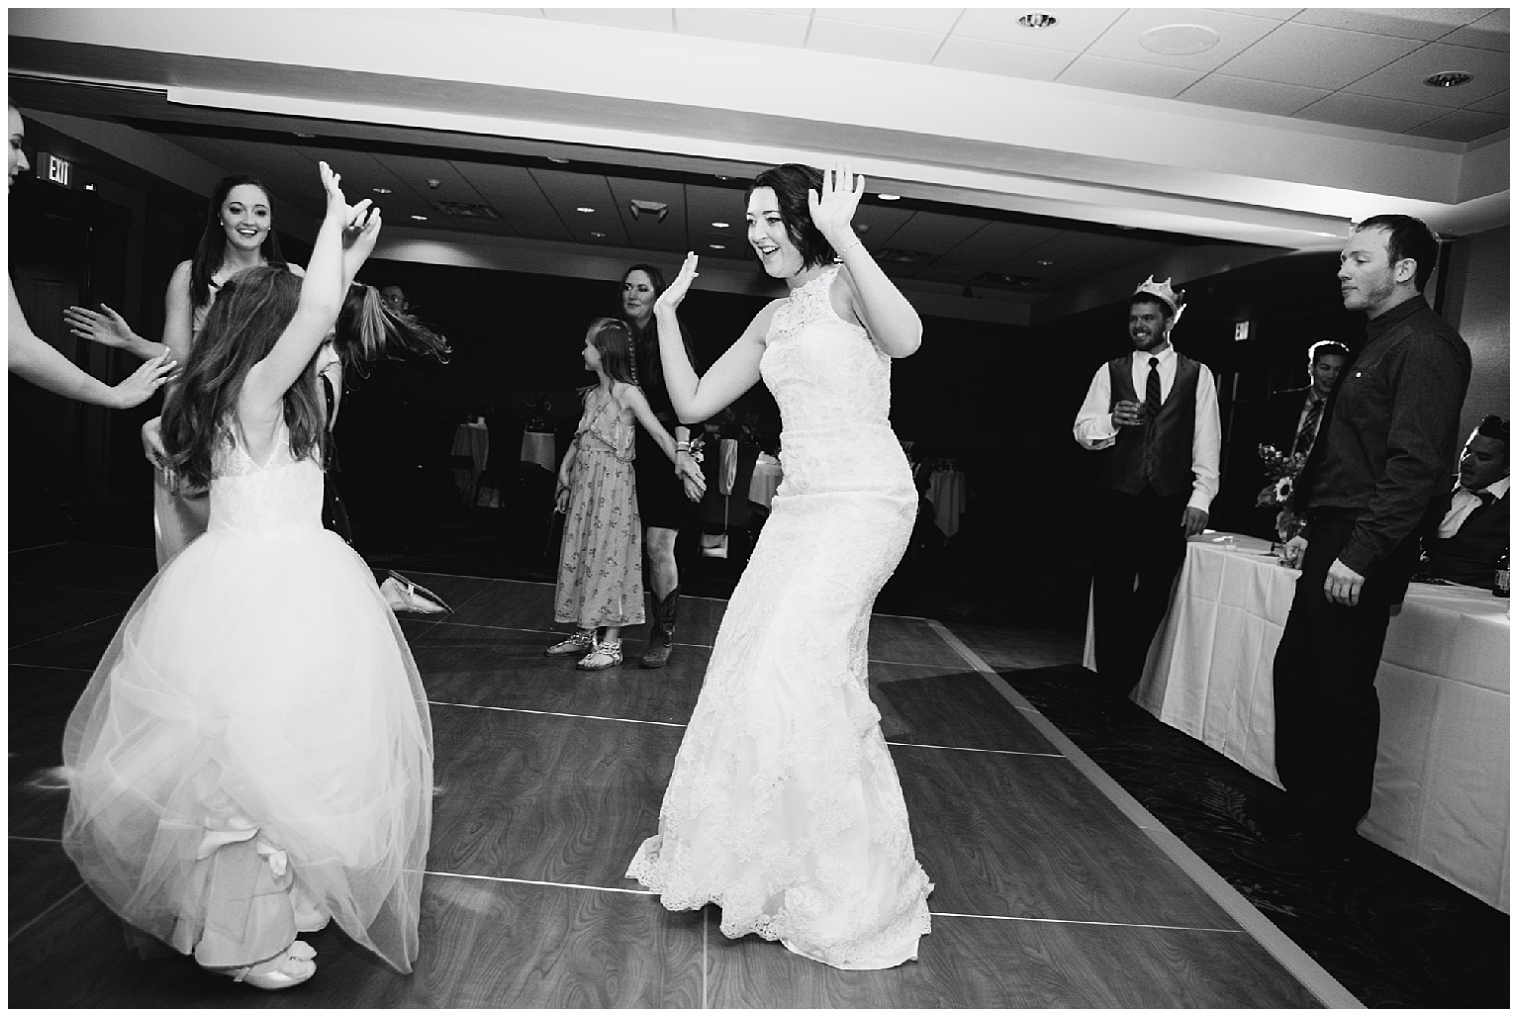 The bride dances with her daughter and guests at her Sevens wedding.